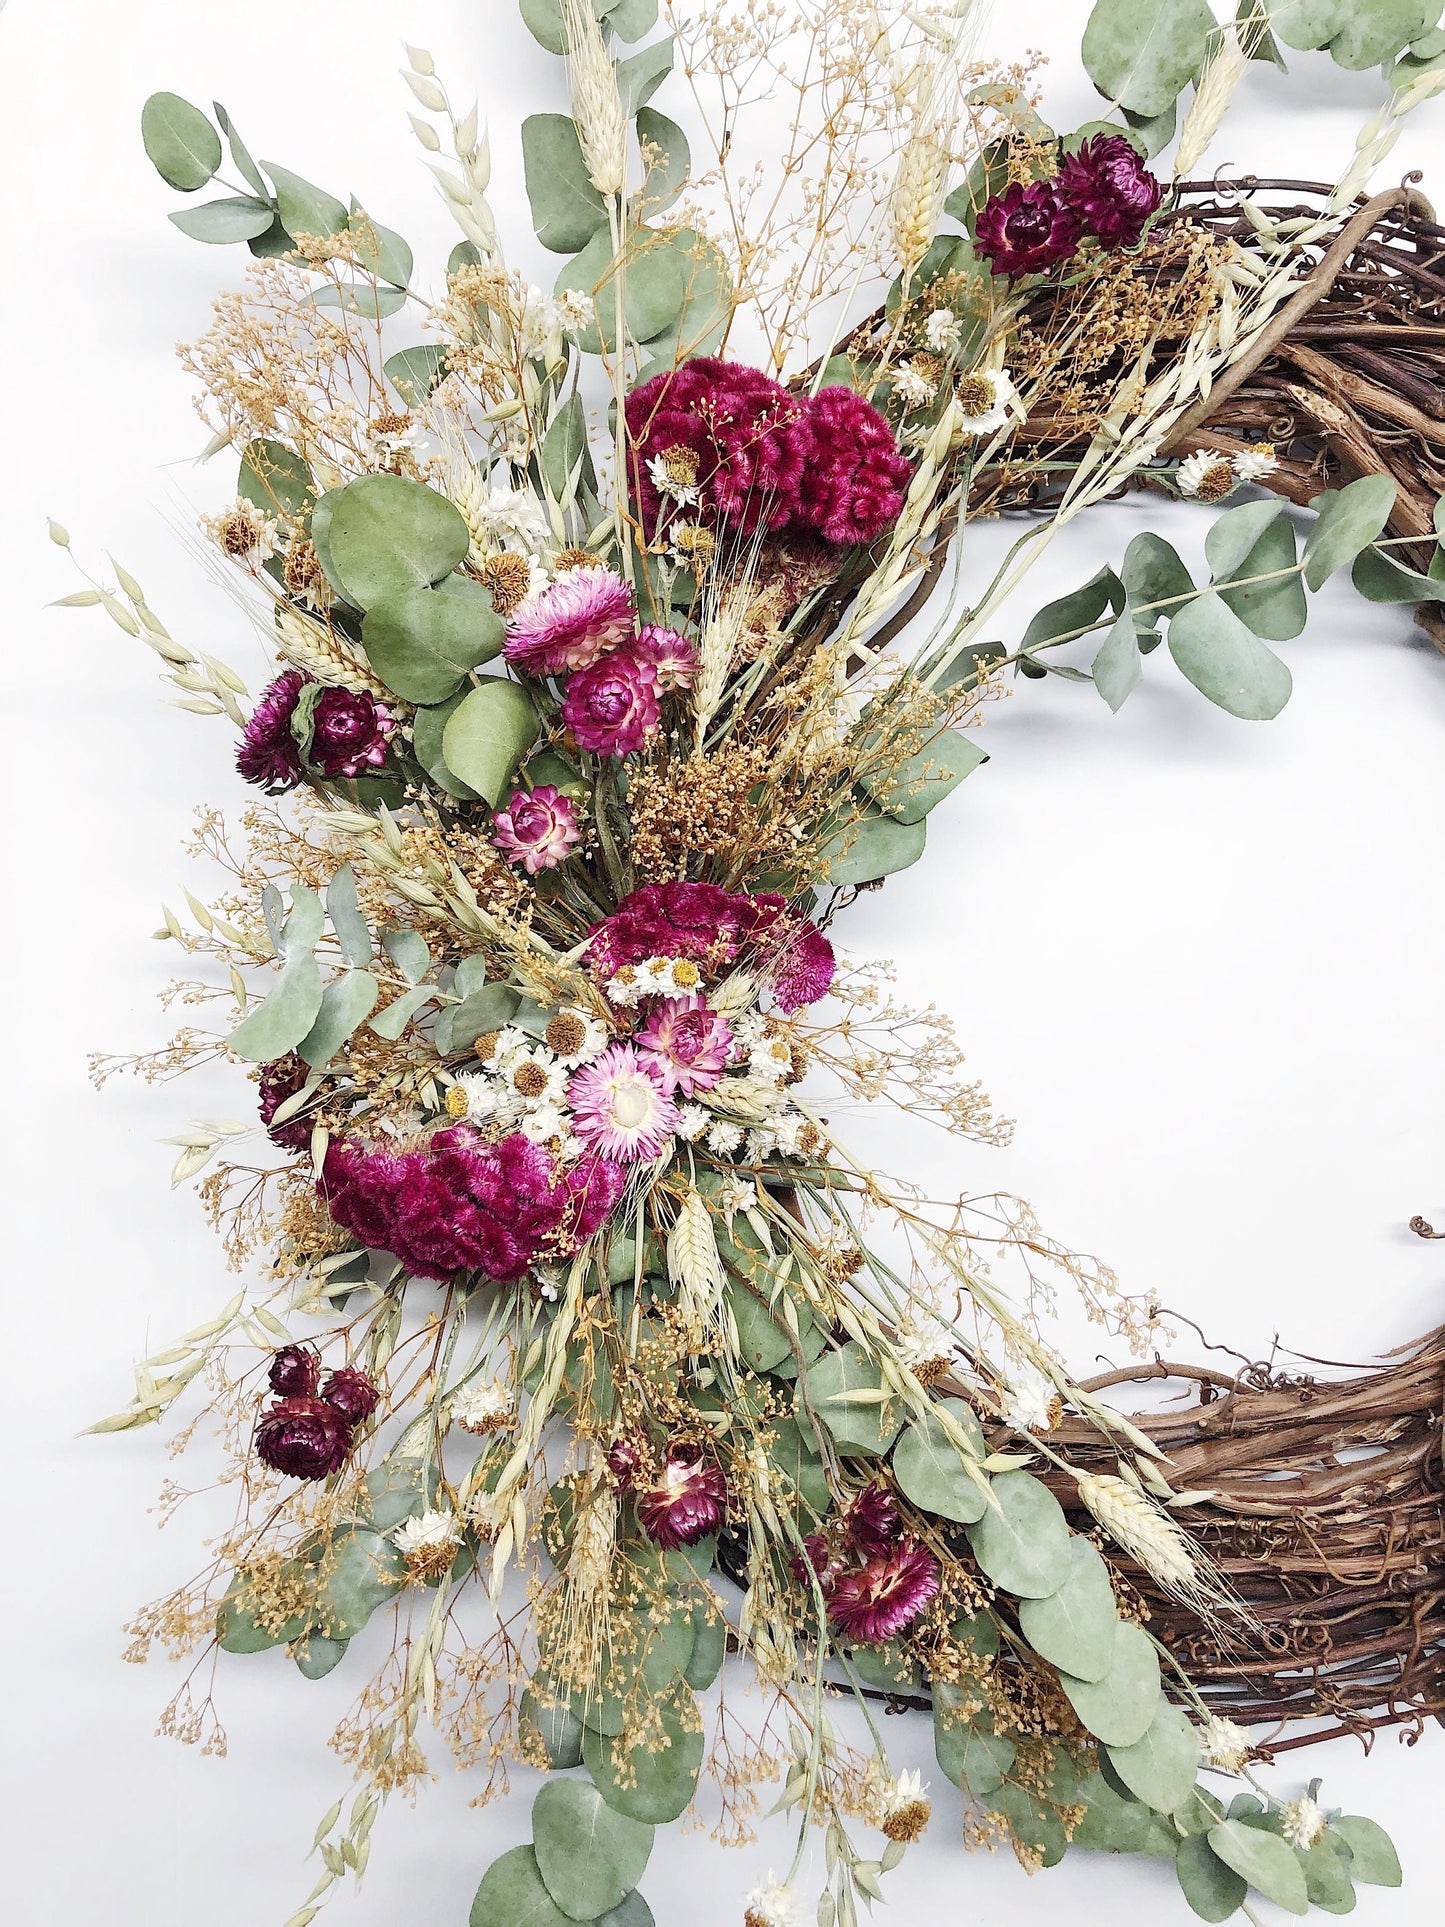 Dried Wreath, Eucalyptus, Coxcomb, Preserved Flower Wreath, Door Wreath, Wall Decoration, Pink Flowers, Greenery, Simple, Grapevine